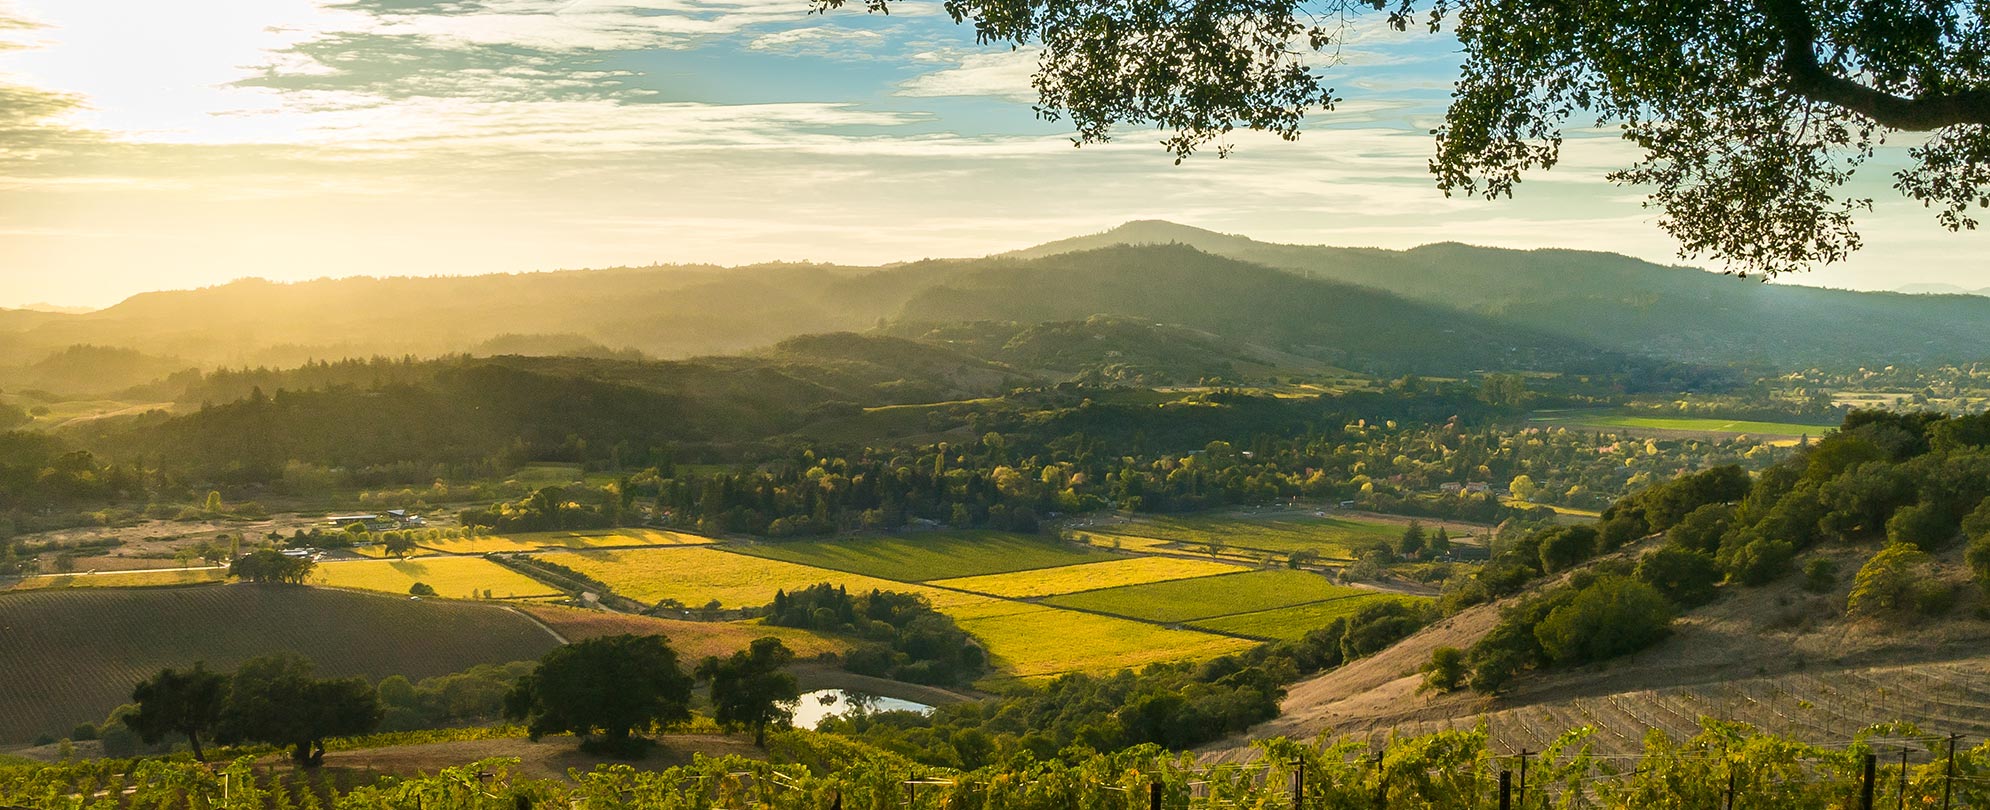 Sunset over Sonoma Valley wine country in California.